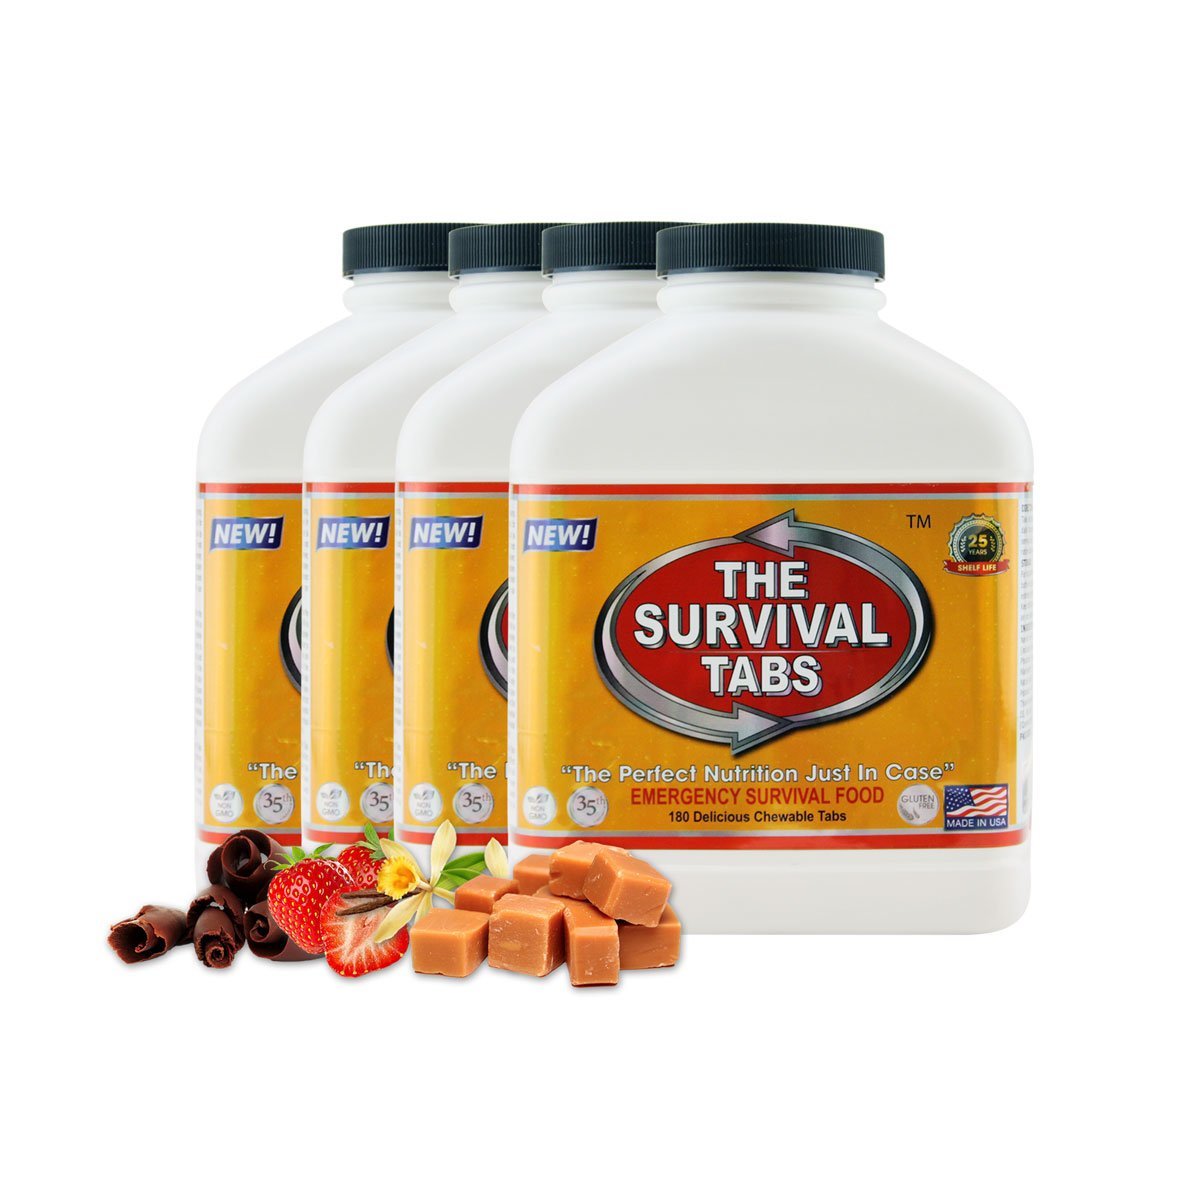 THE SURVIVAL TABS – EMERGENCY FOOD RATIONS